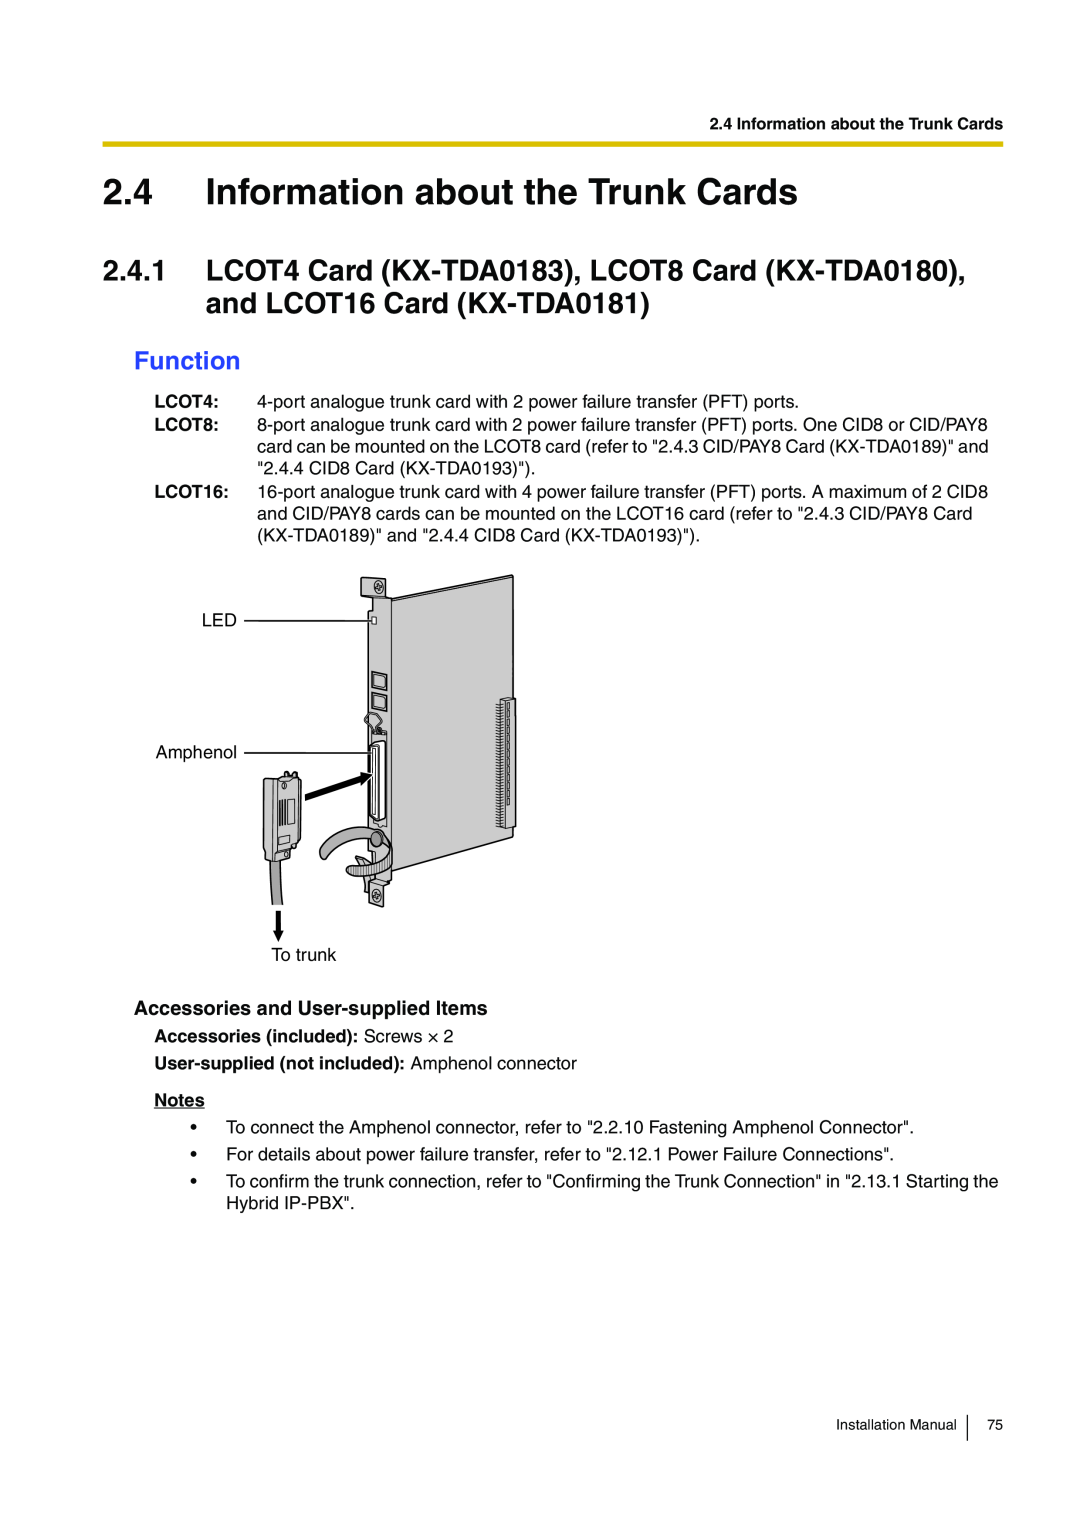 Panasonic KX-TDA100 installation manual Information about the Trunk Cards, Function, Accessories and User-supplied Items 